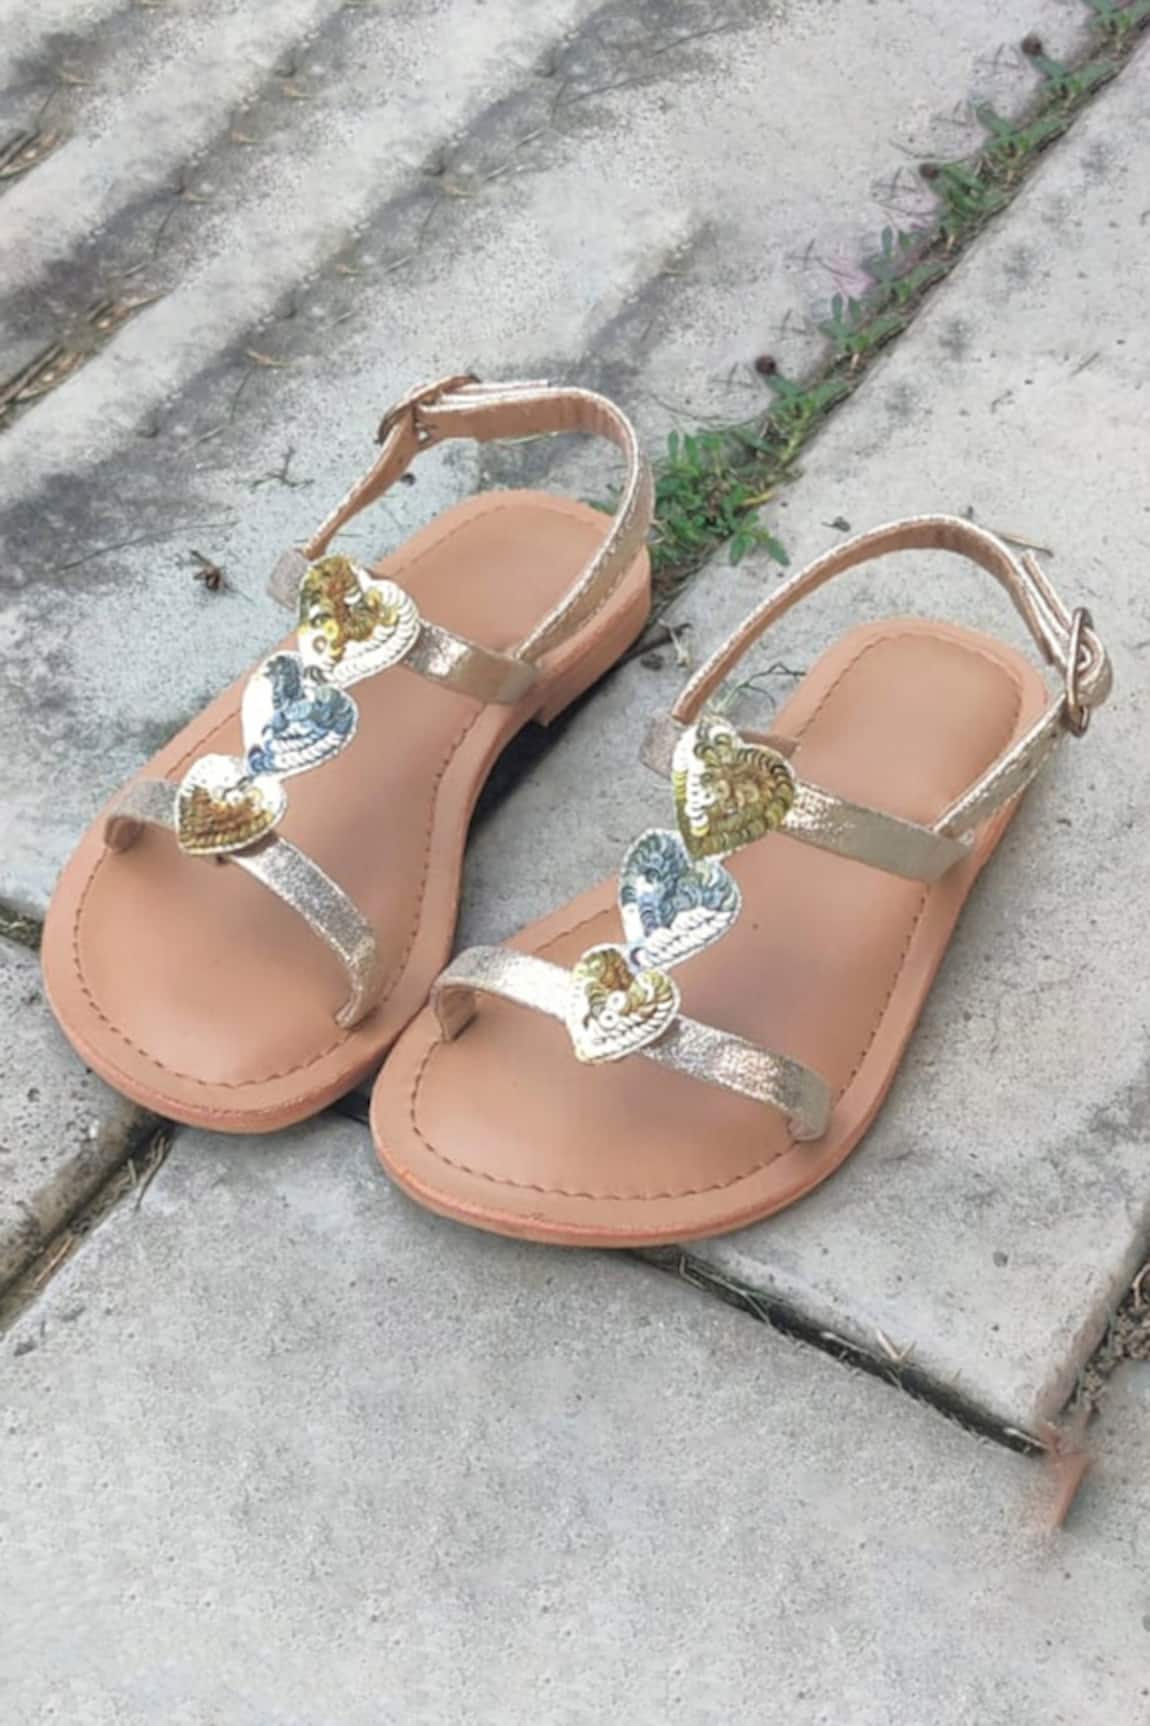 Sandalwali Dilly Sandals